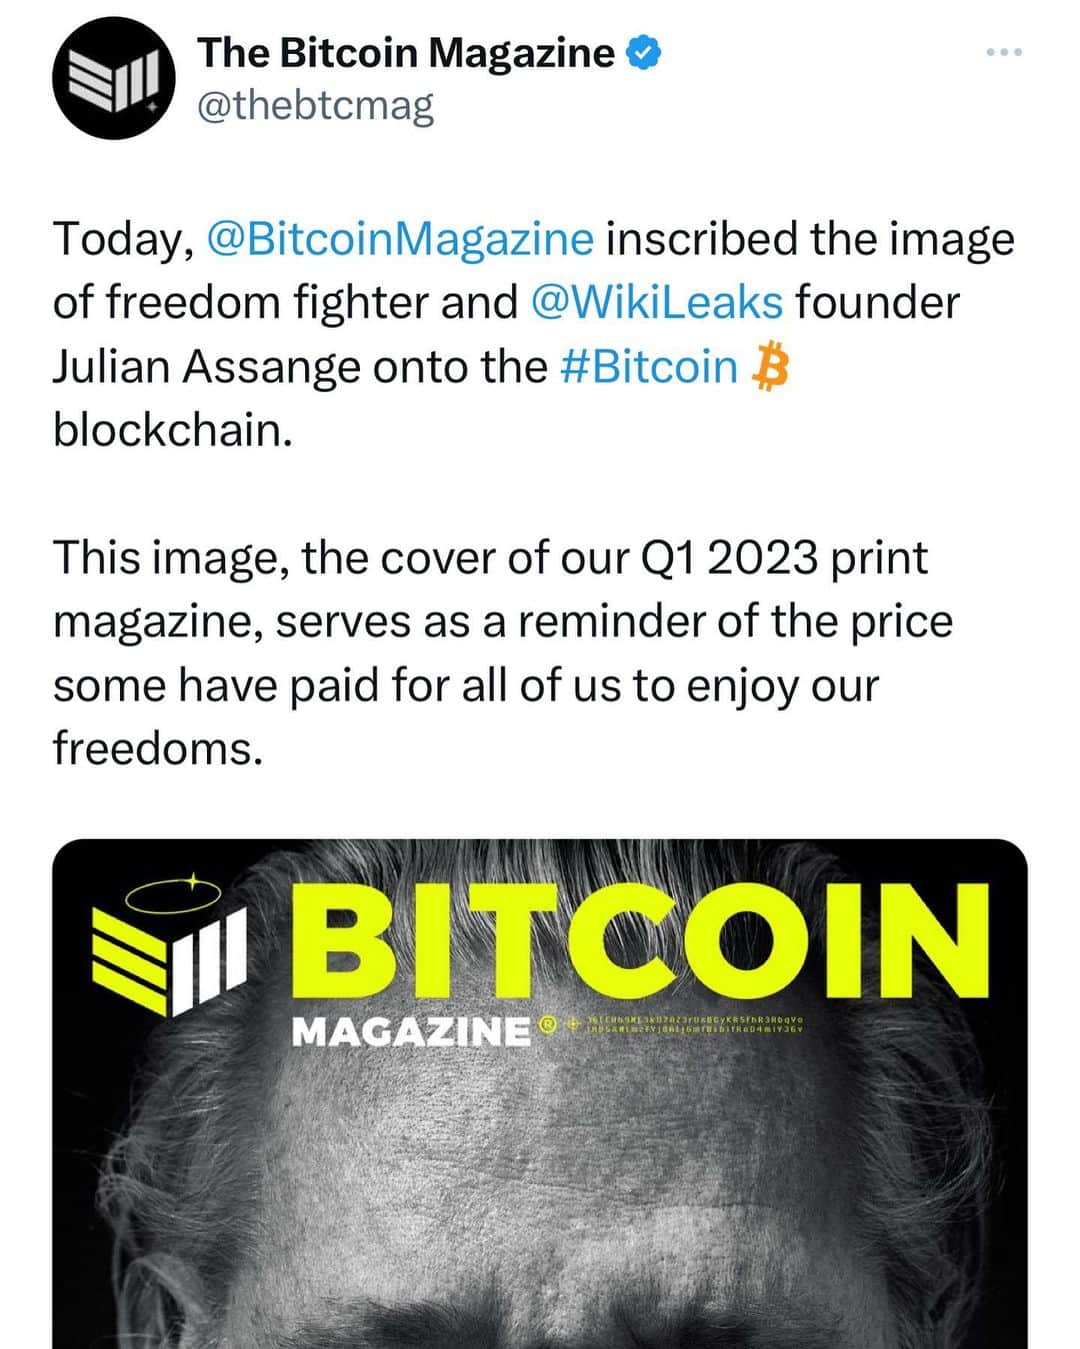 WikiLeaksのインスタグラム：「Bitcoin Magazine @bitcoinmagazine inscribes image of WikiLeaks founder Julian Assange on the #Bitcoin  blockchain in a show of support for the publisher, detained in one form or another for over 12 years and facing extradition to the US and a 175 year sentence for publishing @BitcoinMagazine #FreeAssangeNOW」